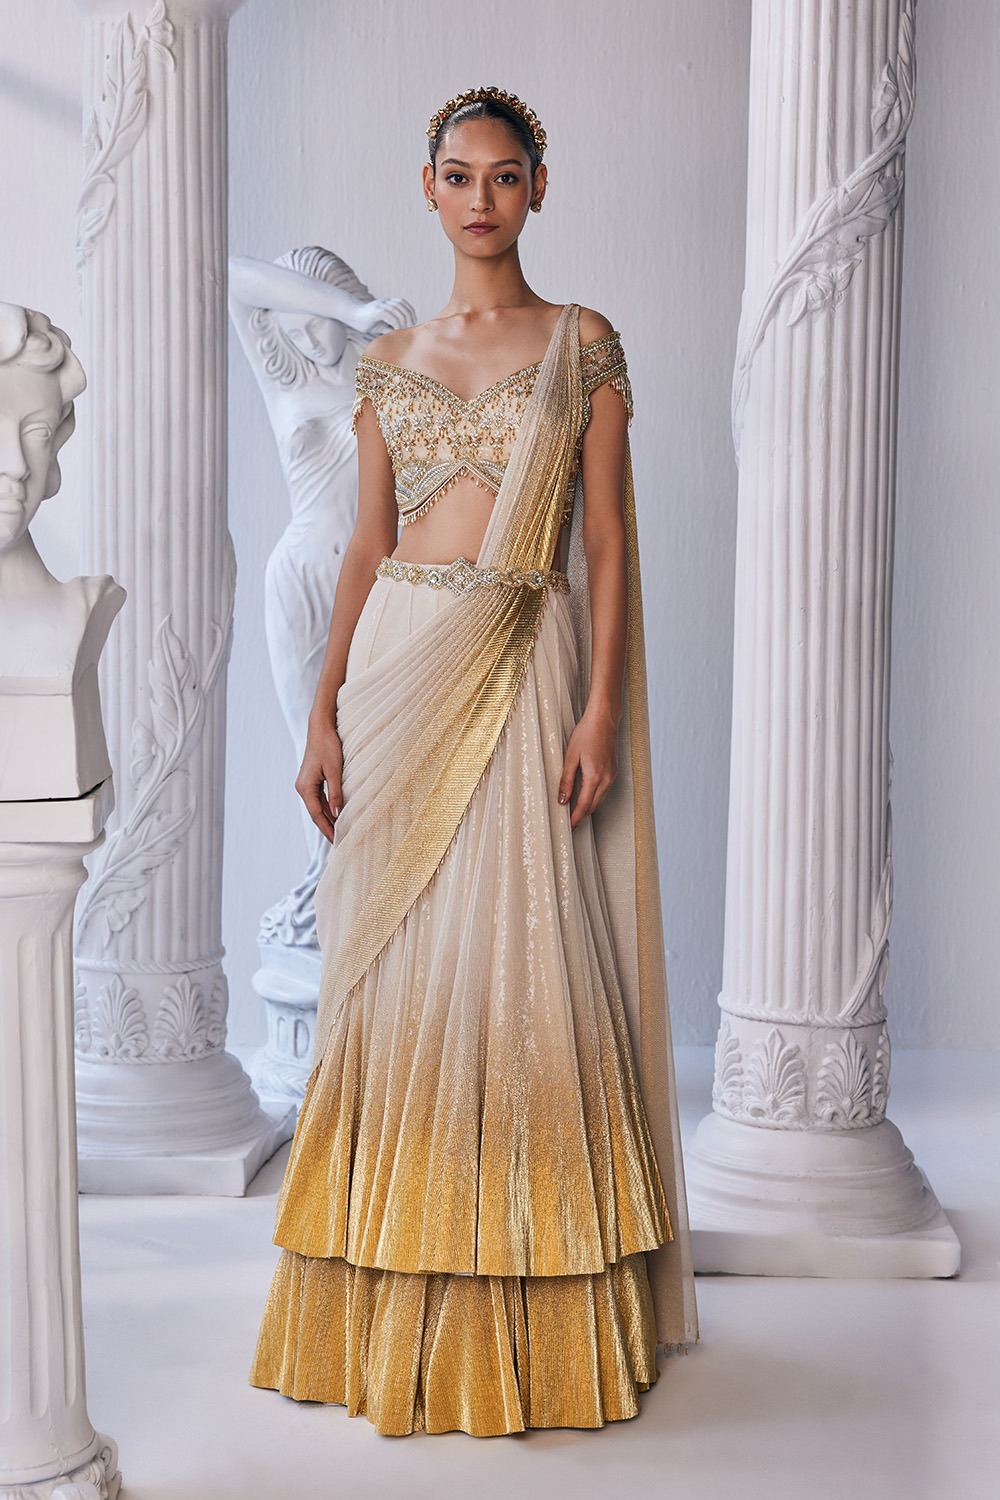 Draped Double Layer Lehenga With An Emroidered Waistband And Corset